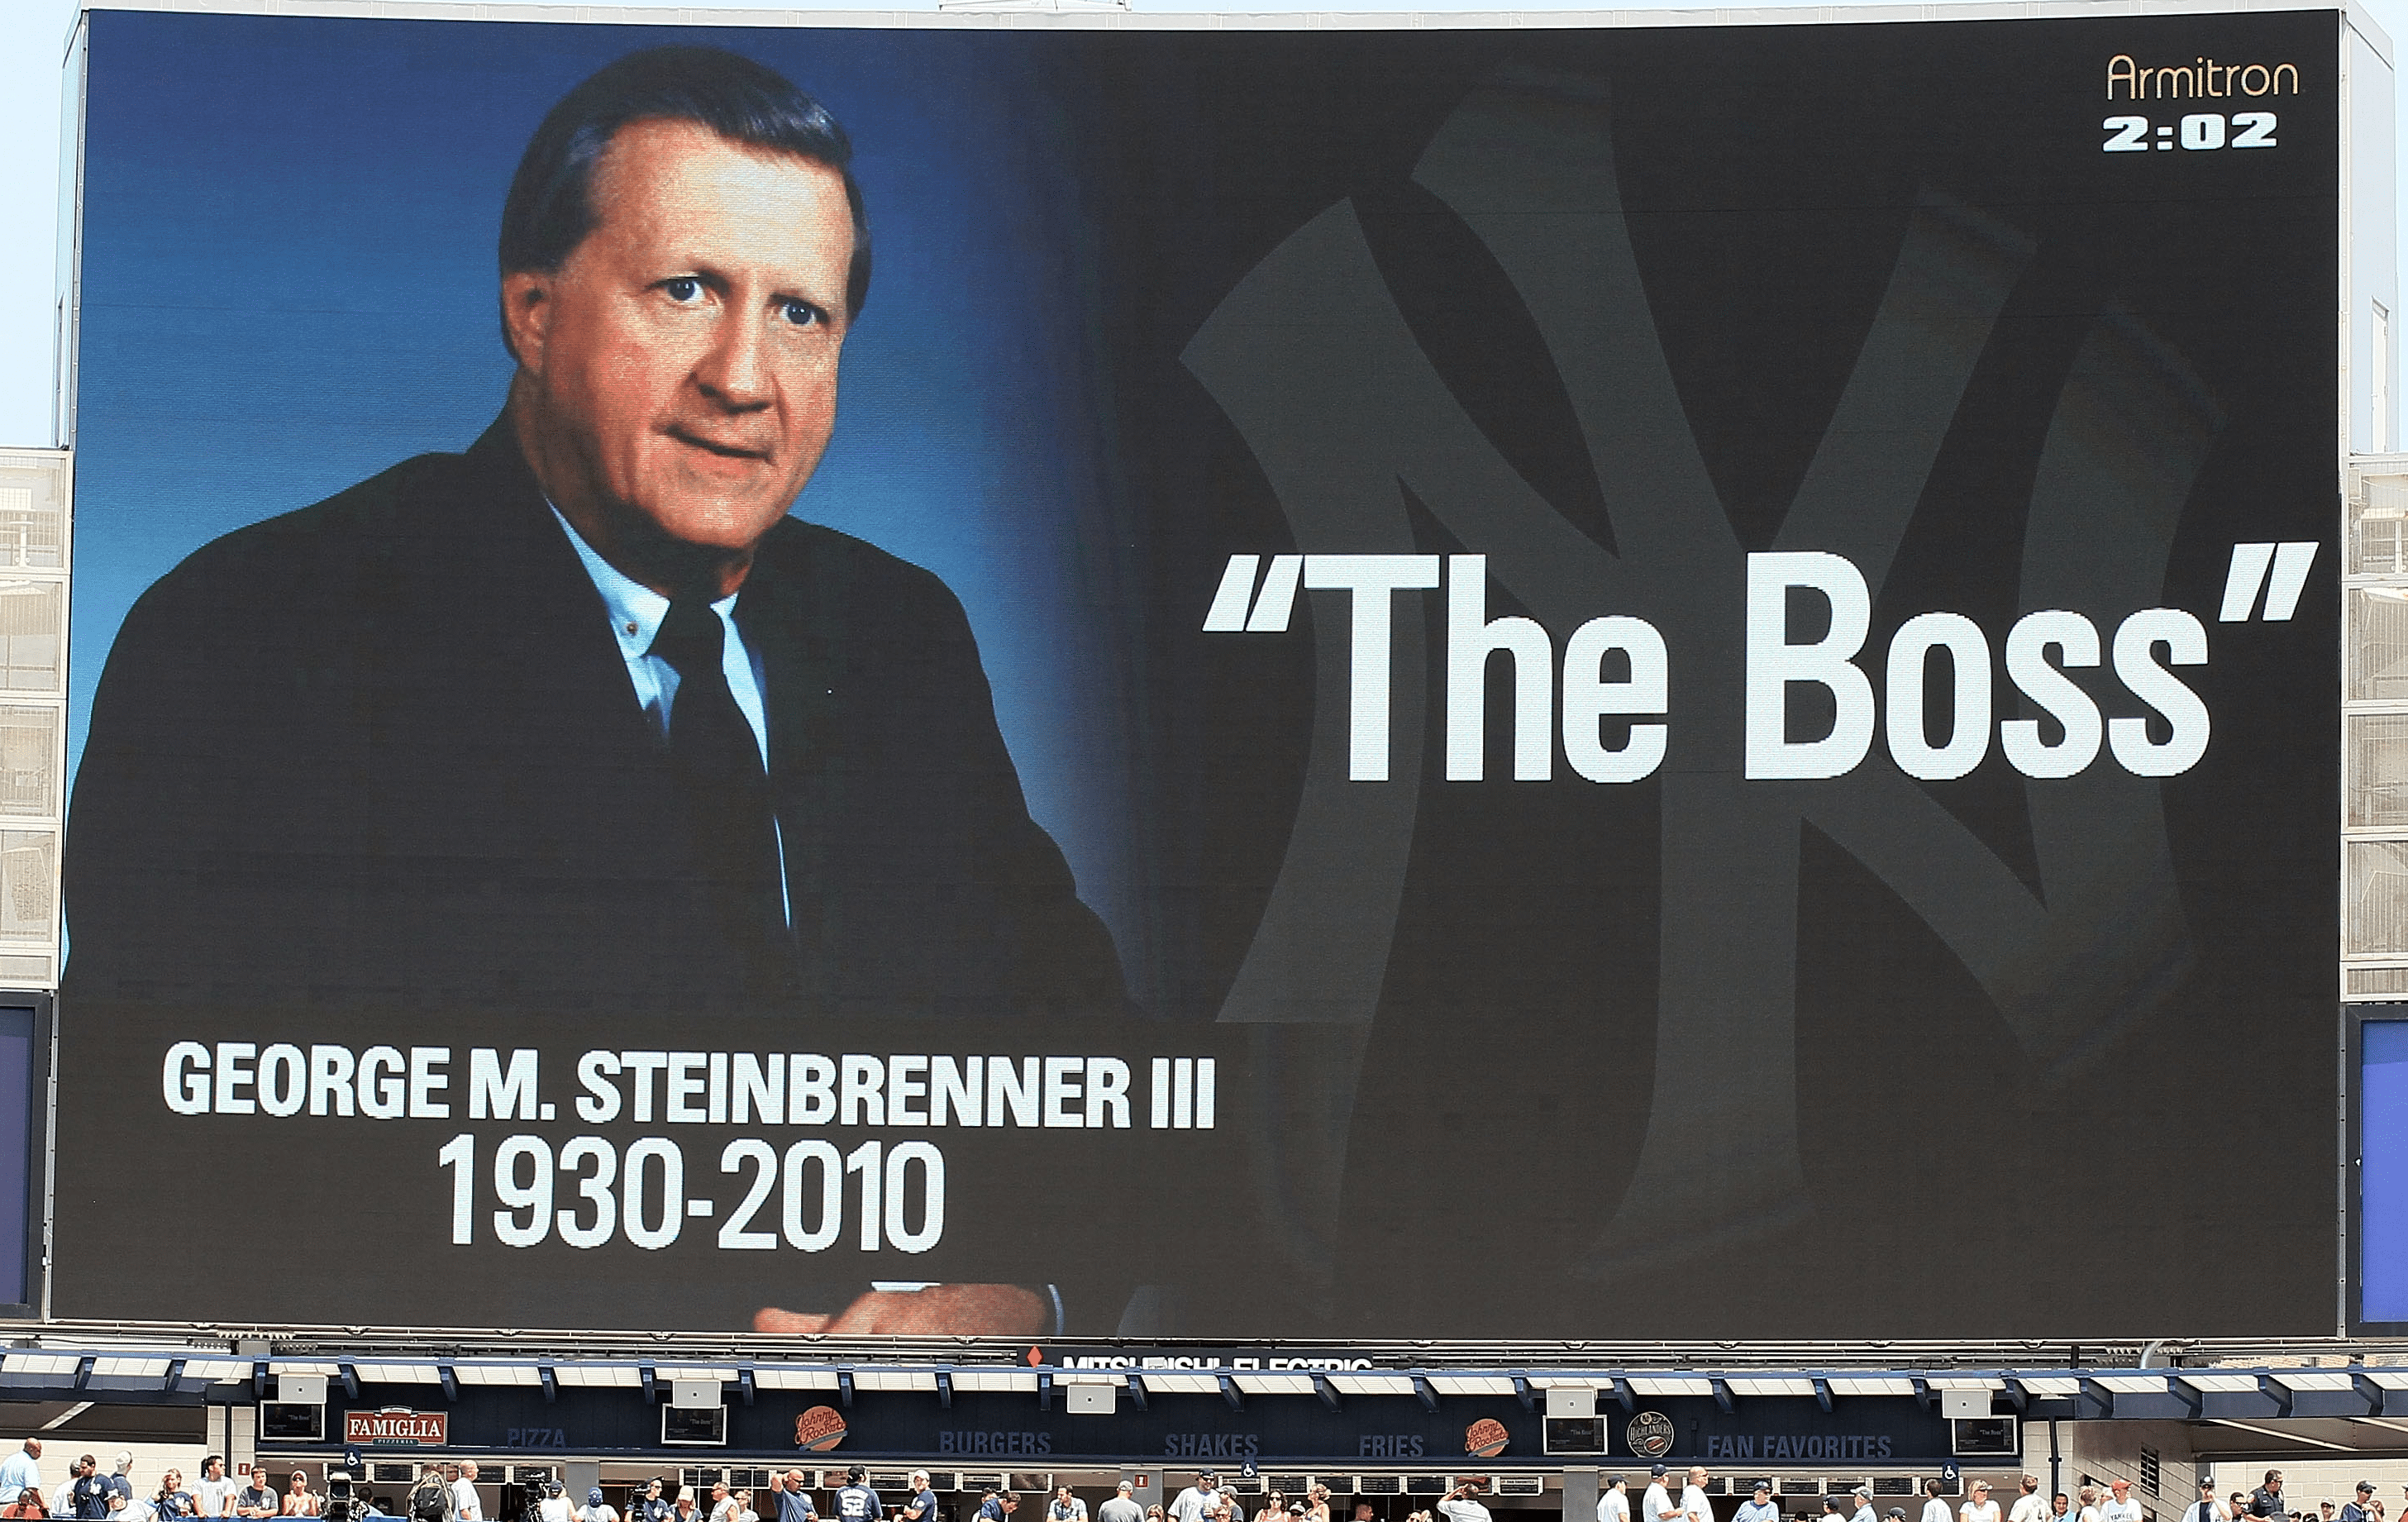 2008 MLB All-Star Game - George Steinbrenner introduction